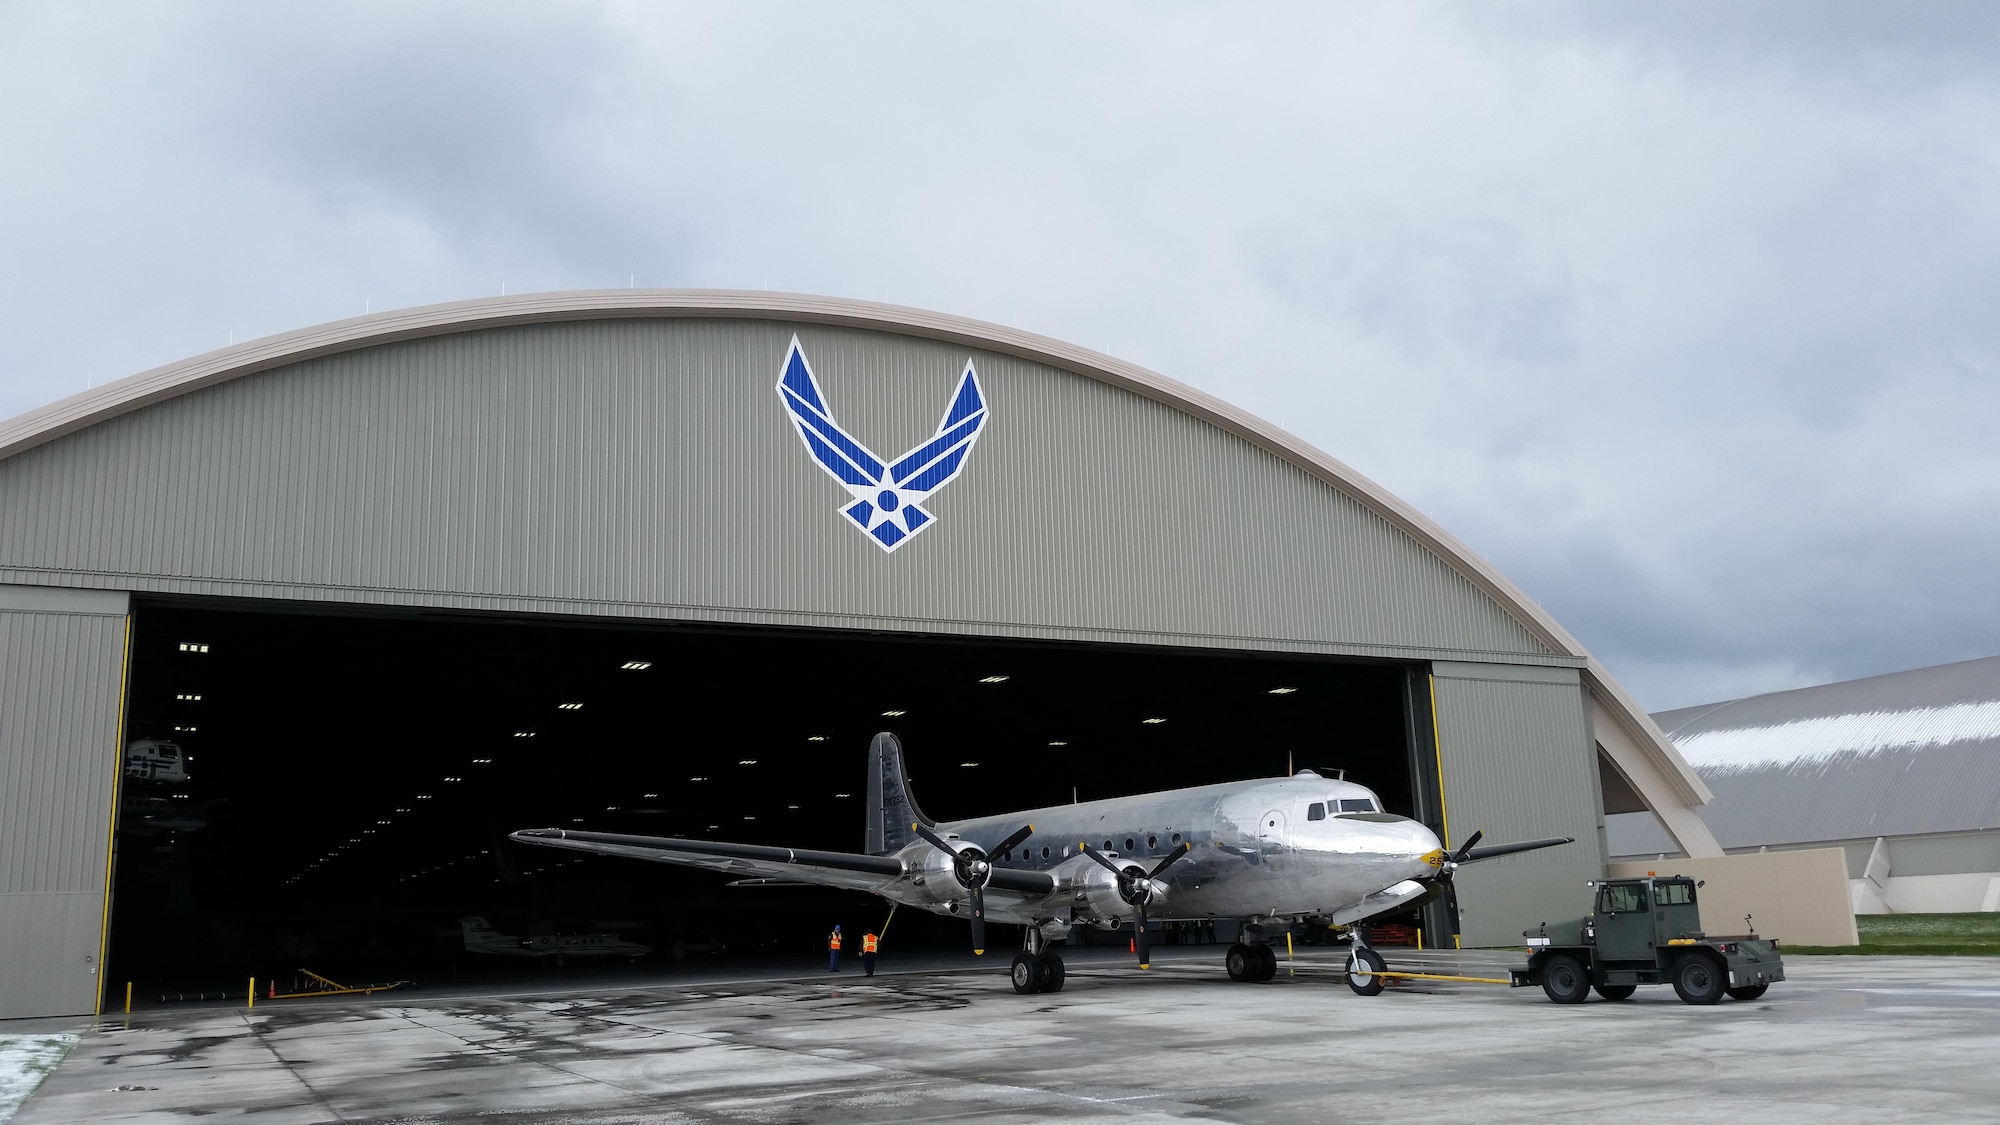 DAYTON, Ohio -- The VC-54C Sacred Cow being towed into the fourth building at the National Museum of the United States Air Force on April 9, 2016. (U.S. Air Force photo by Rob Bardua)